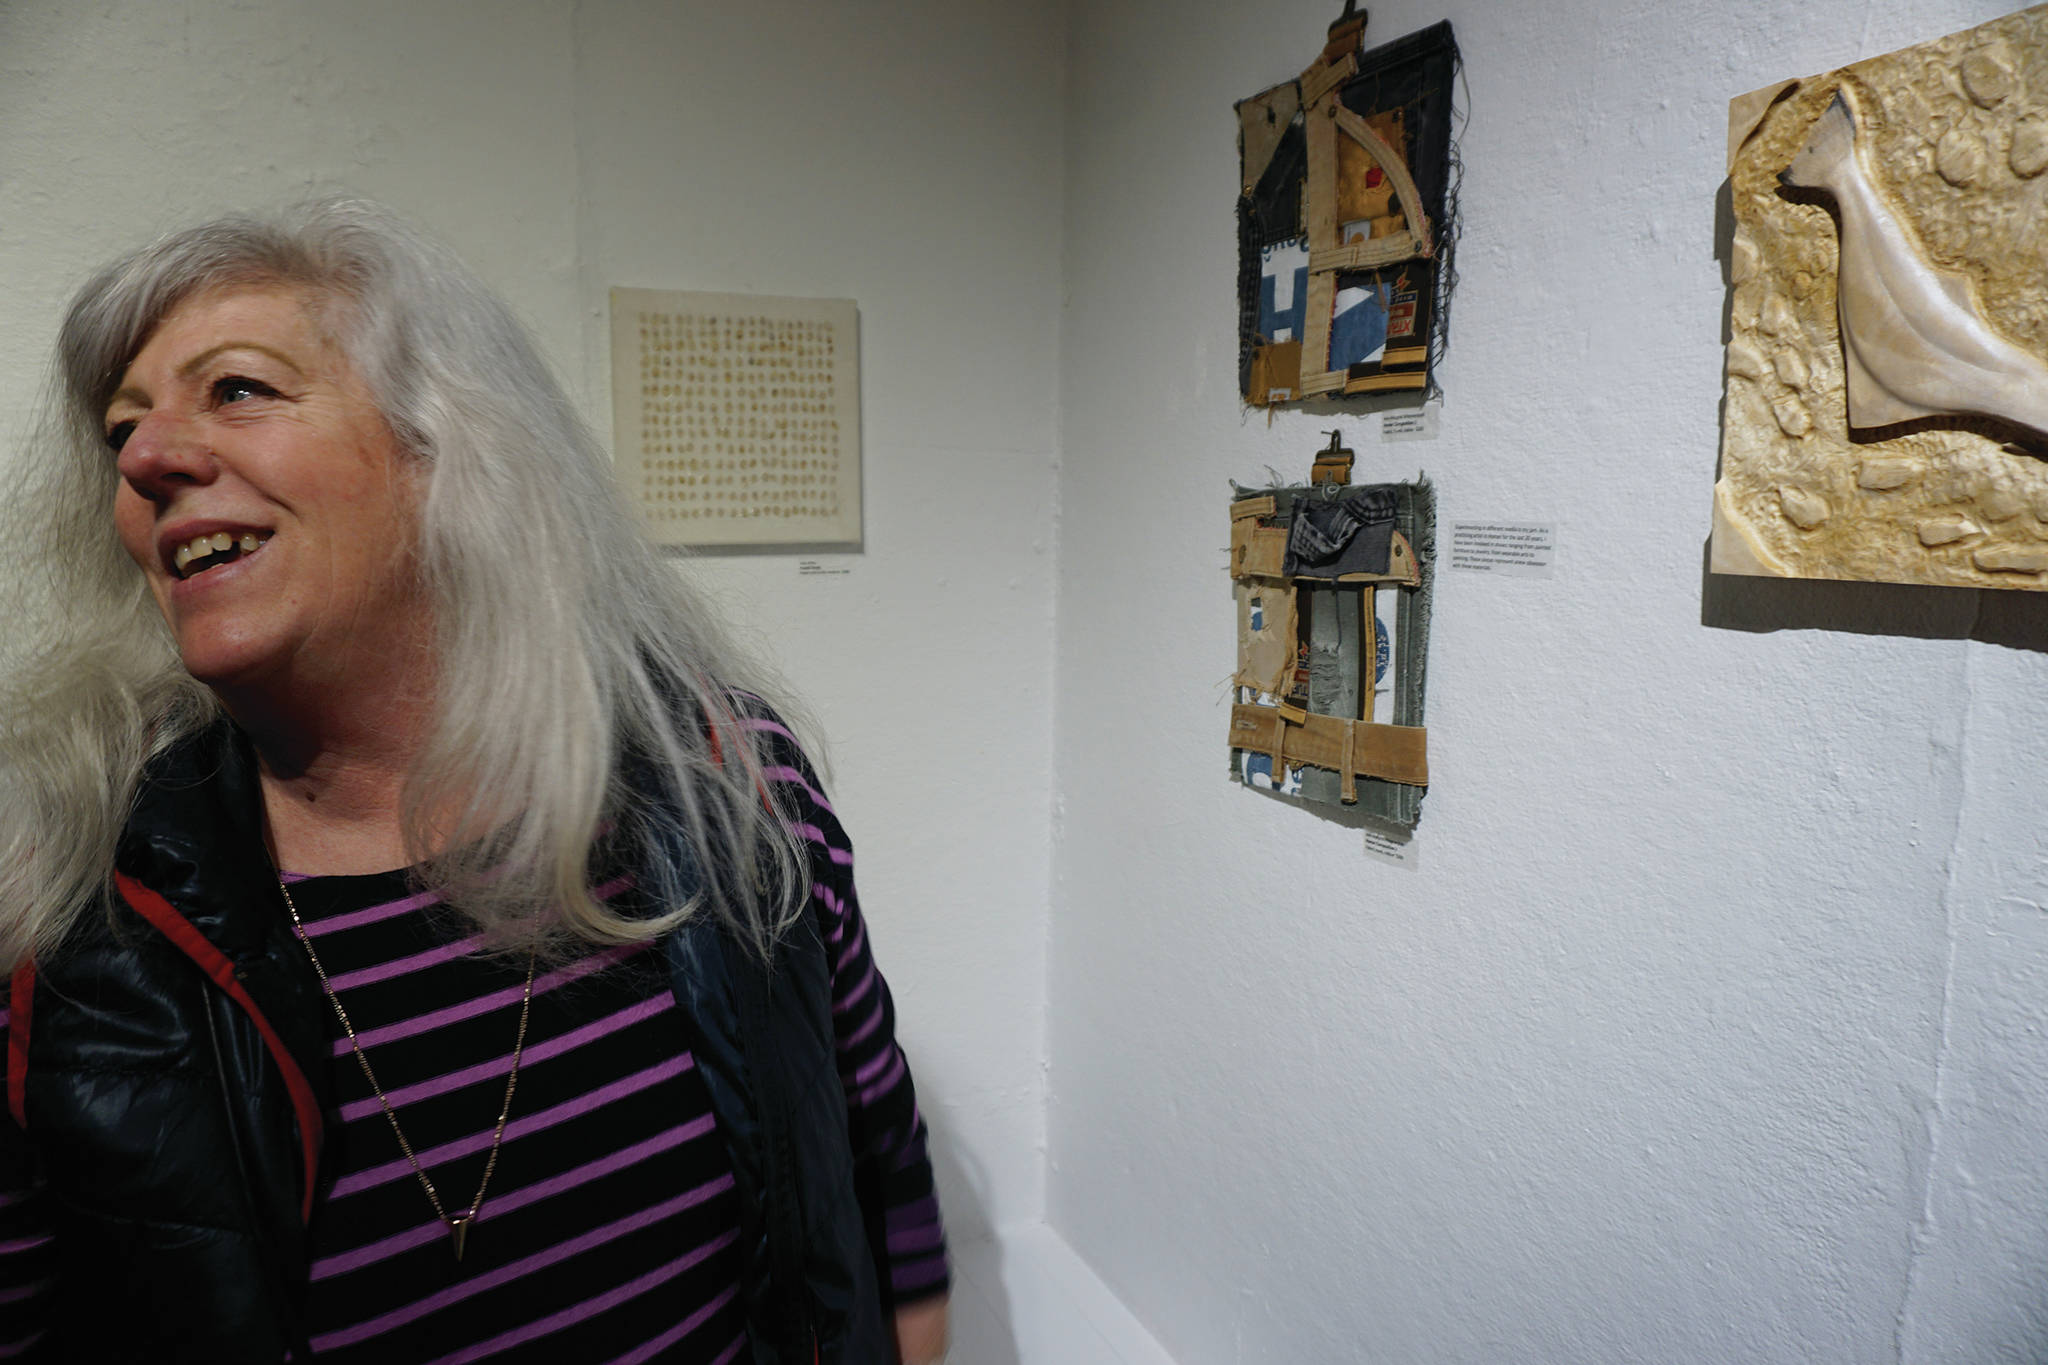 Ann-Margret Wimmerstedt stands by two of her works in the 10x10 show at Bunnell Street Arts Center that opened on Nov. 8, 2019, in Homer, Alaska. (Photo by Michael Armstrong/Homer News)